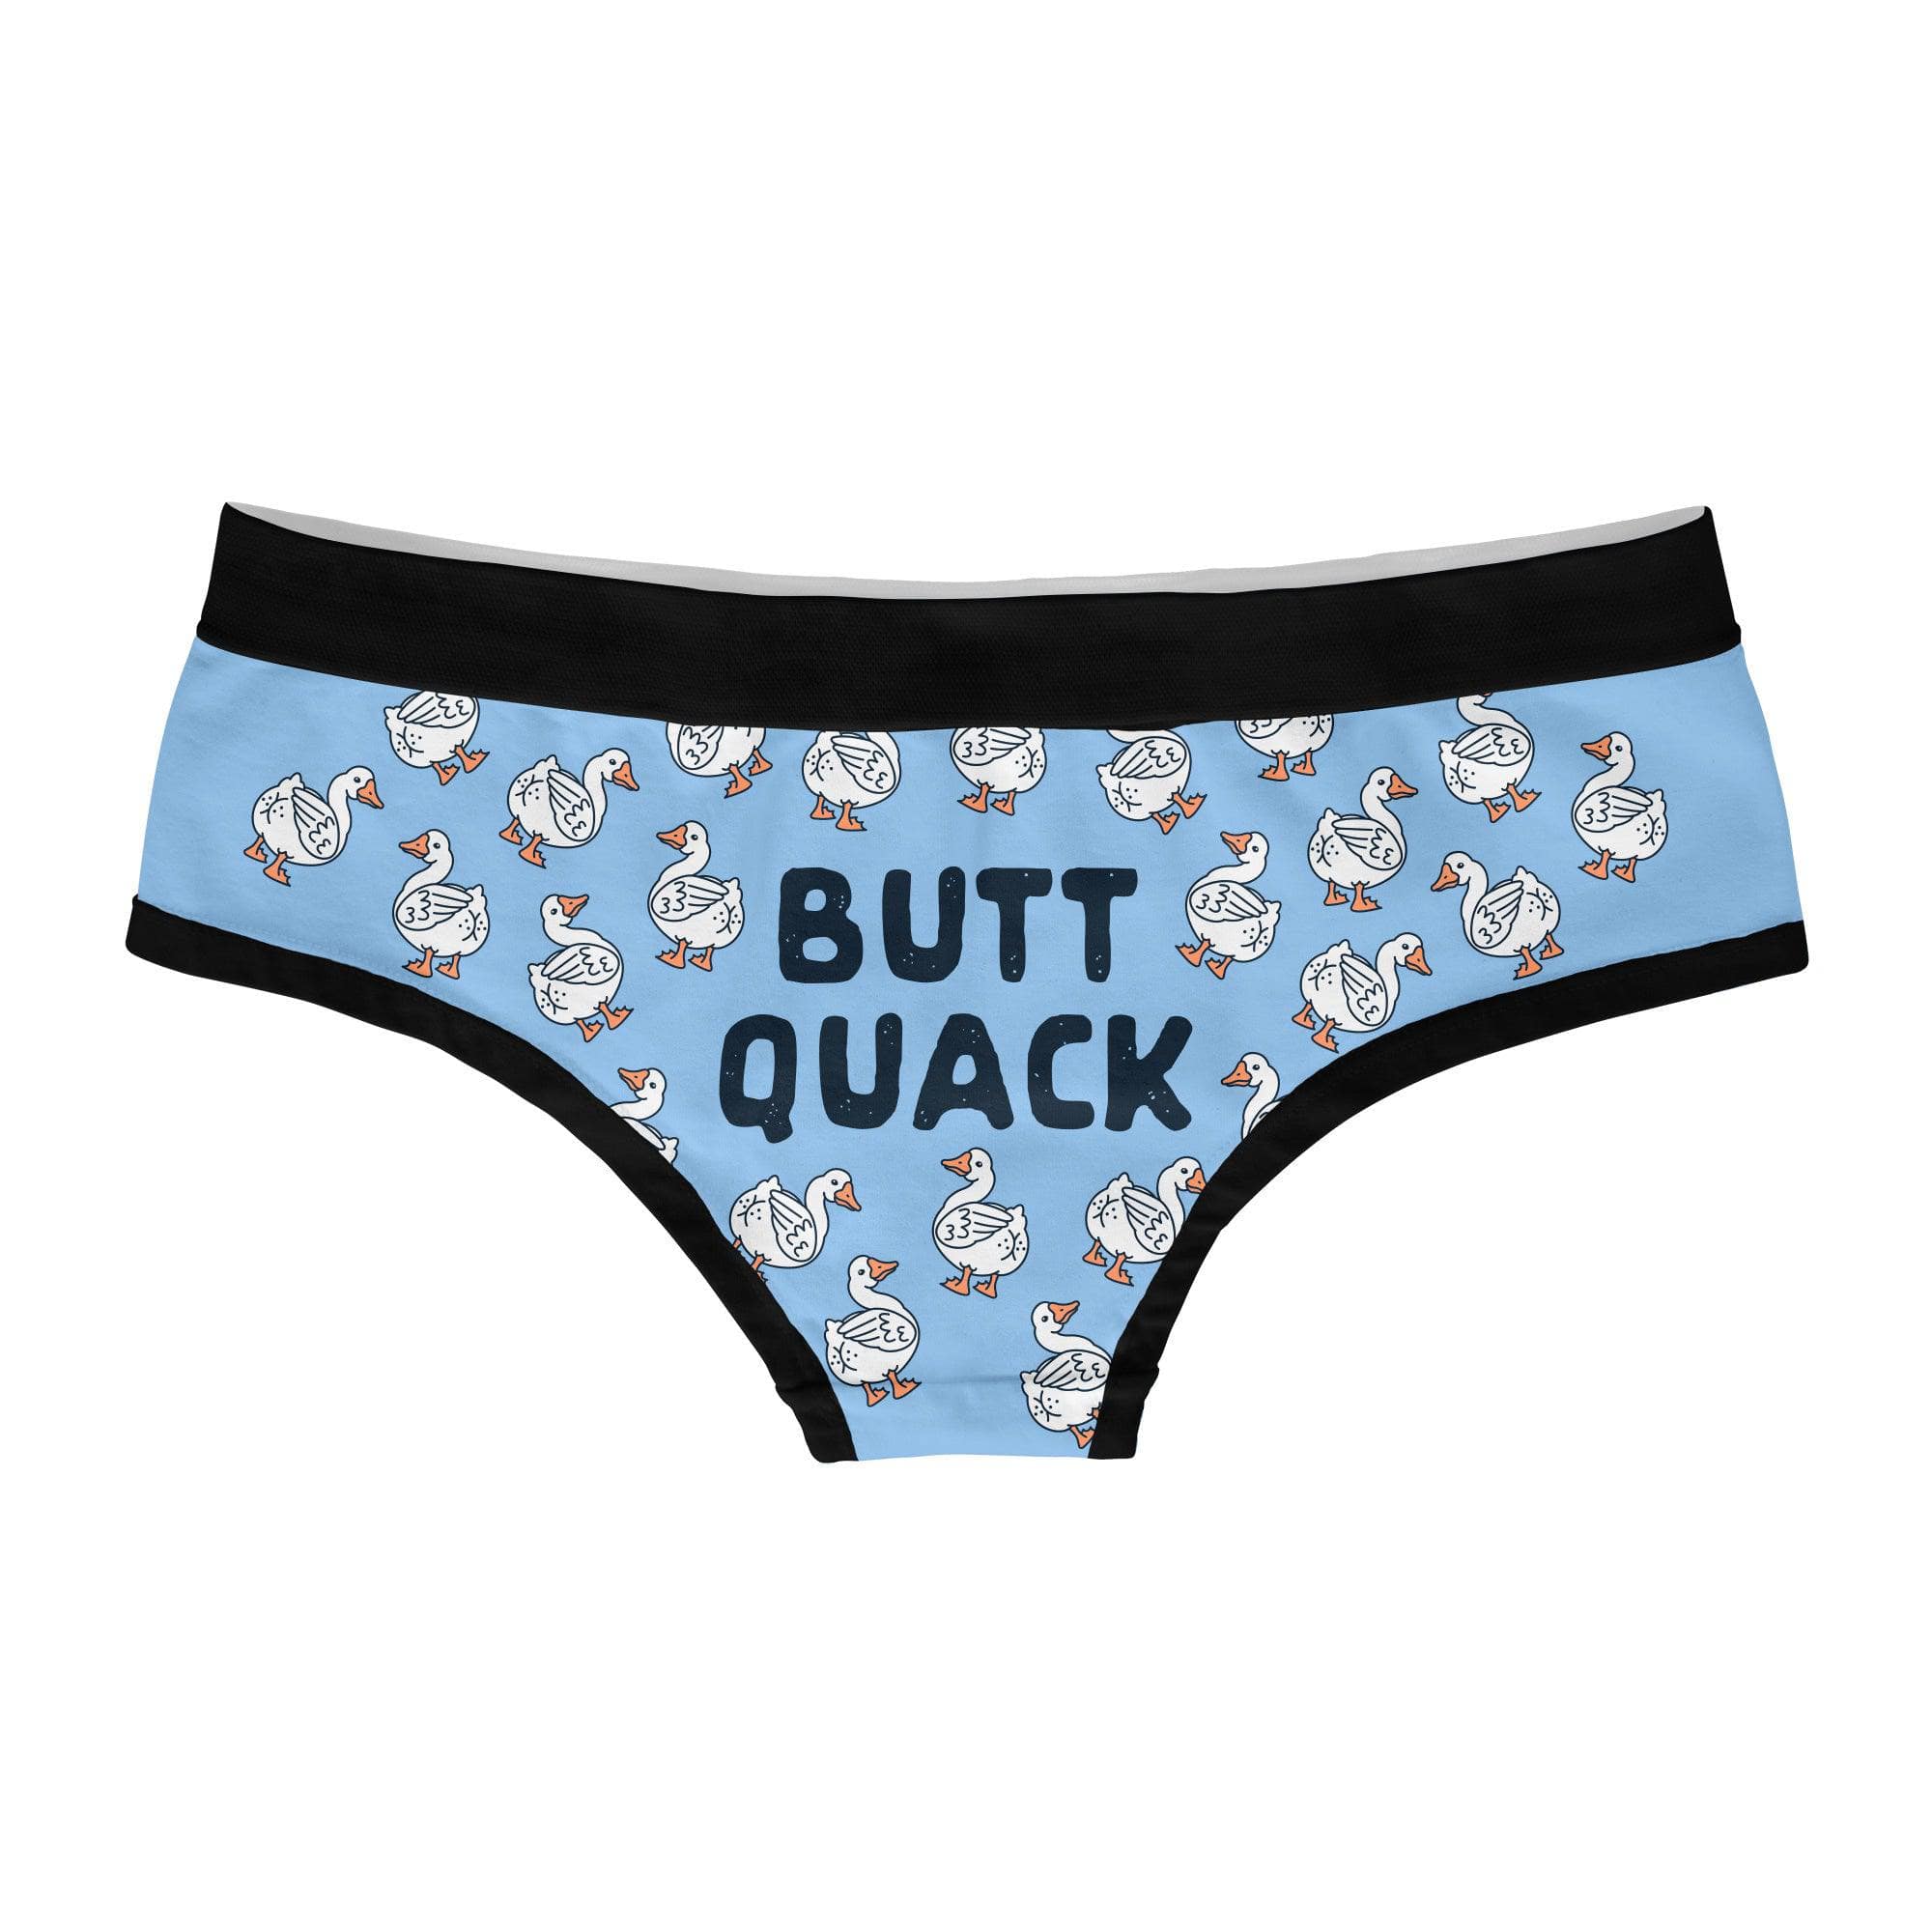 bradley deaton recommends Funny Panties Images